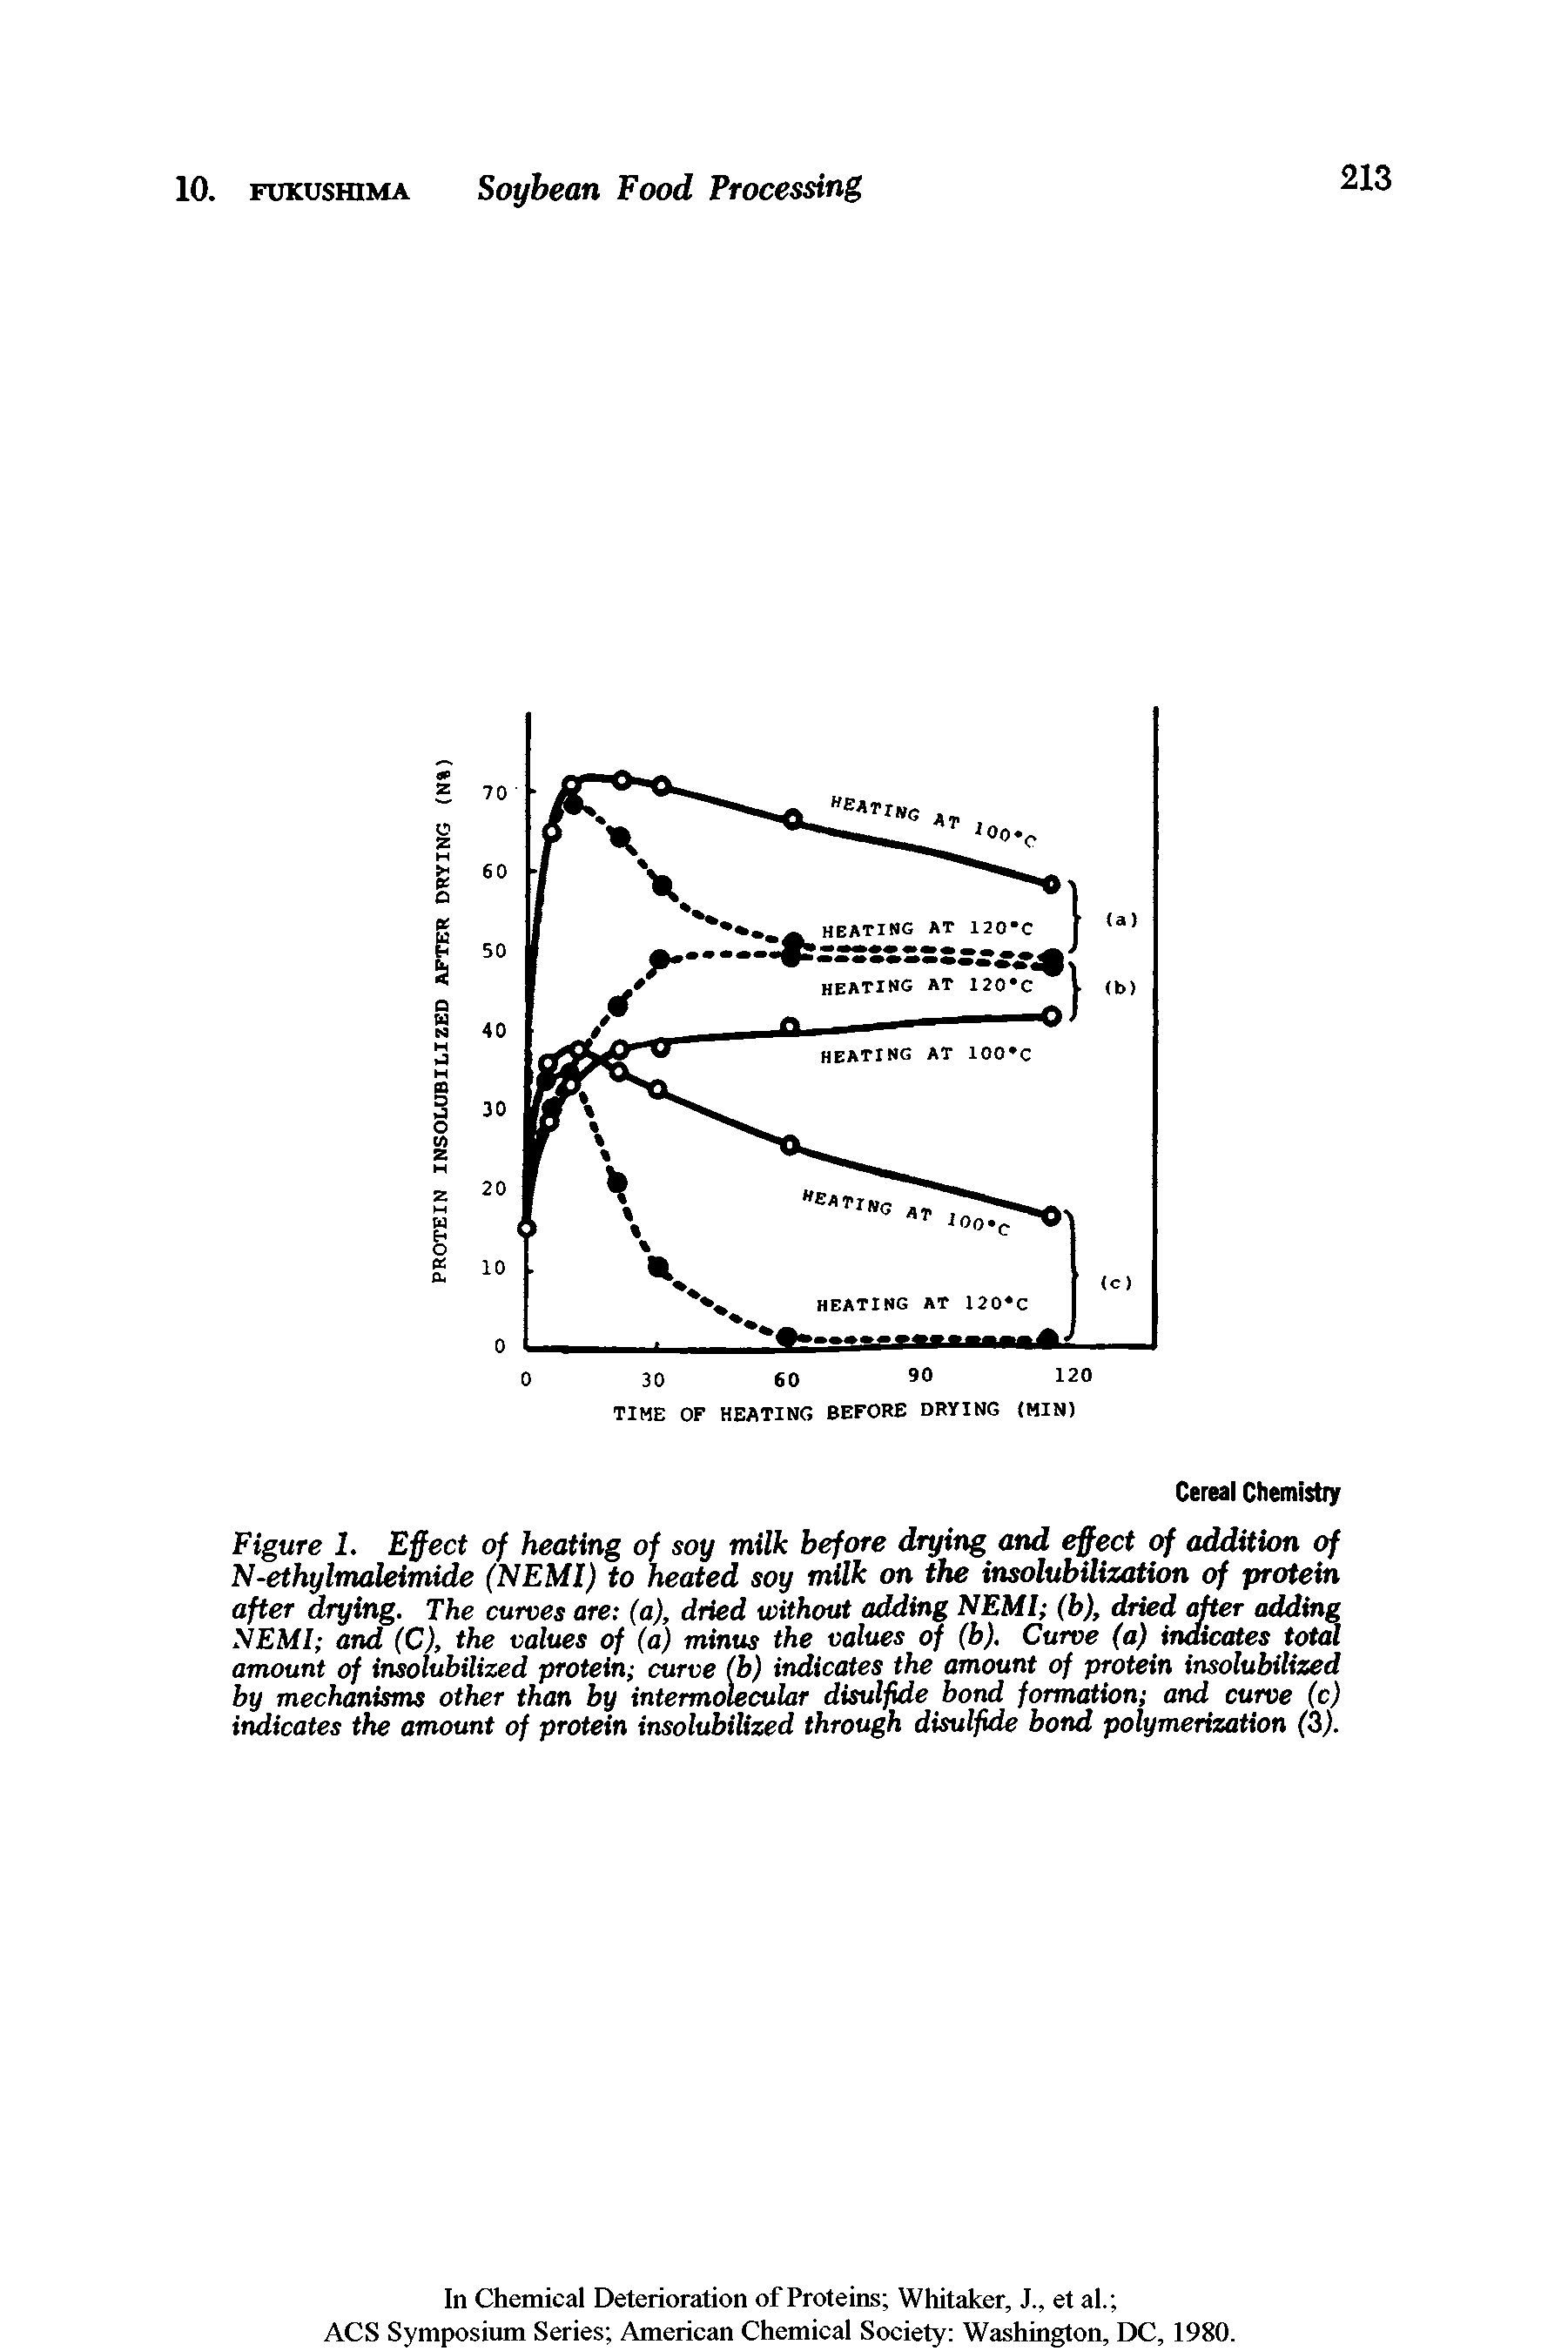 Figure I. Effect of heating of soy milk before drying and effect of addition of N-ethylmaleimide (NEMI) to heated soy milk on the insolubilization of protein after drying. The curves are (a), dried without adding NEMI (b), dried after adding SEMI and (C), the values of (a) minus the values of (b). Curve (a) indicates total amount of insolubilized protein curve (b) indicates the amount of protein insolubilized by mechanisms other than by intermolecular disulfide bond formation and curve (c) indicates the amount of protein insolubilized through disulfide bond polymerization (3).